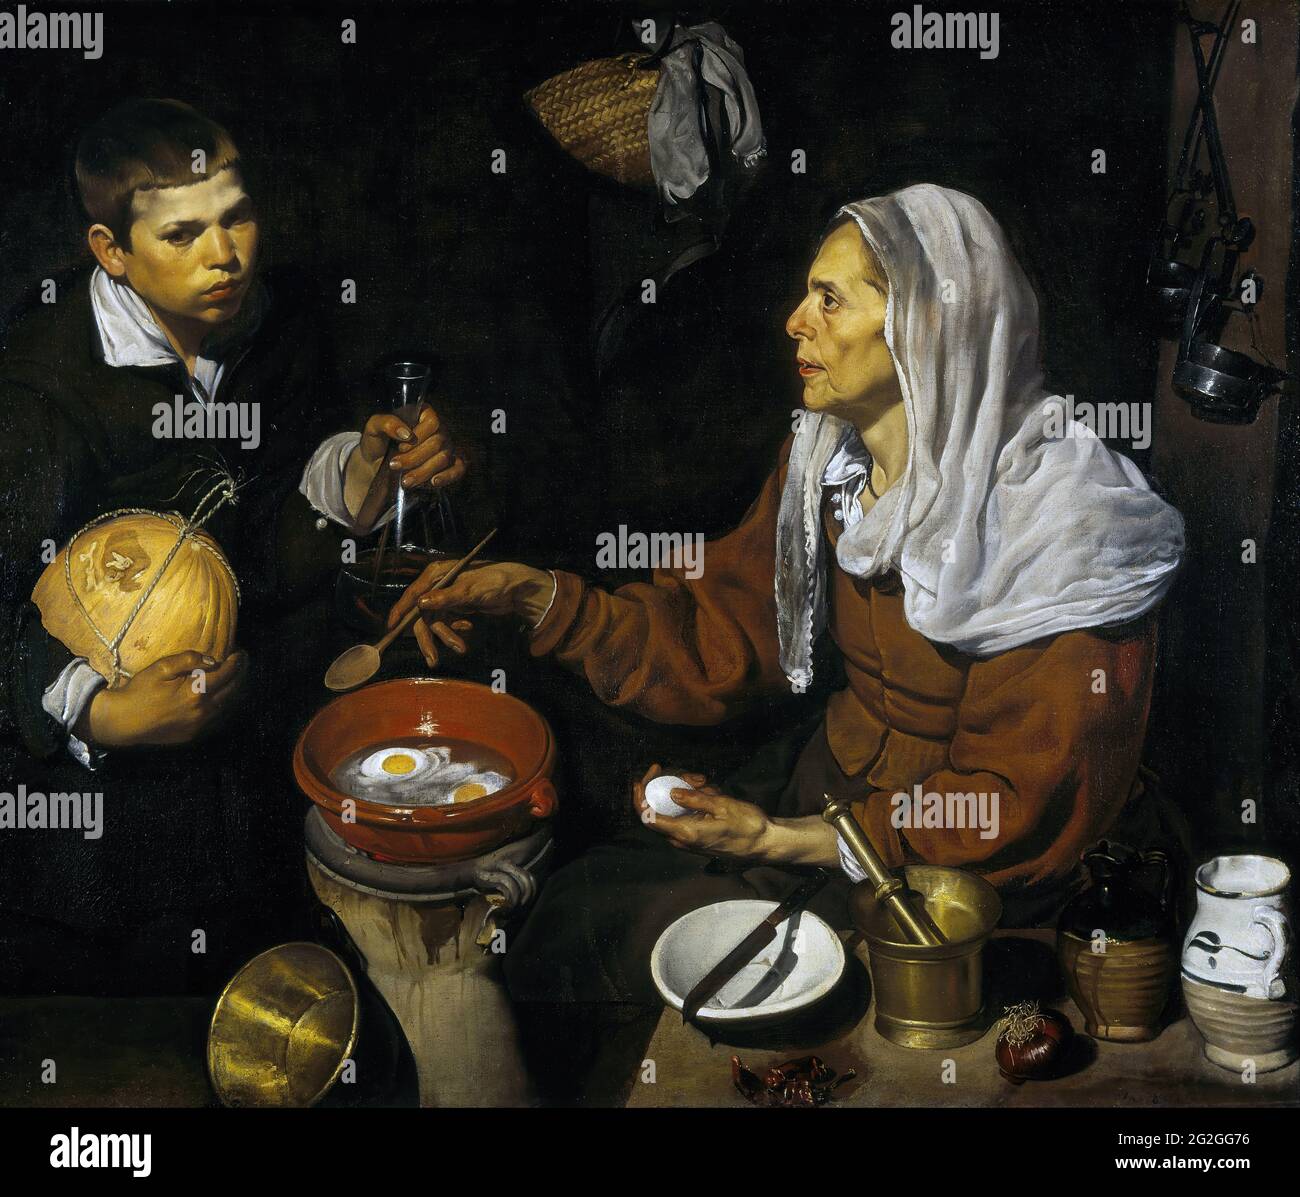 Diego Velazquez - An Old Woman Cooking Eggs Stock Photo